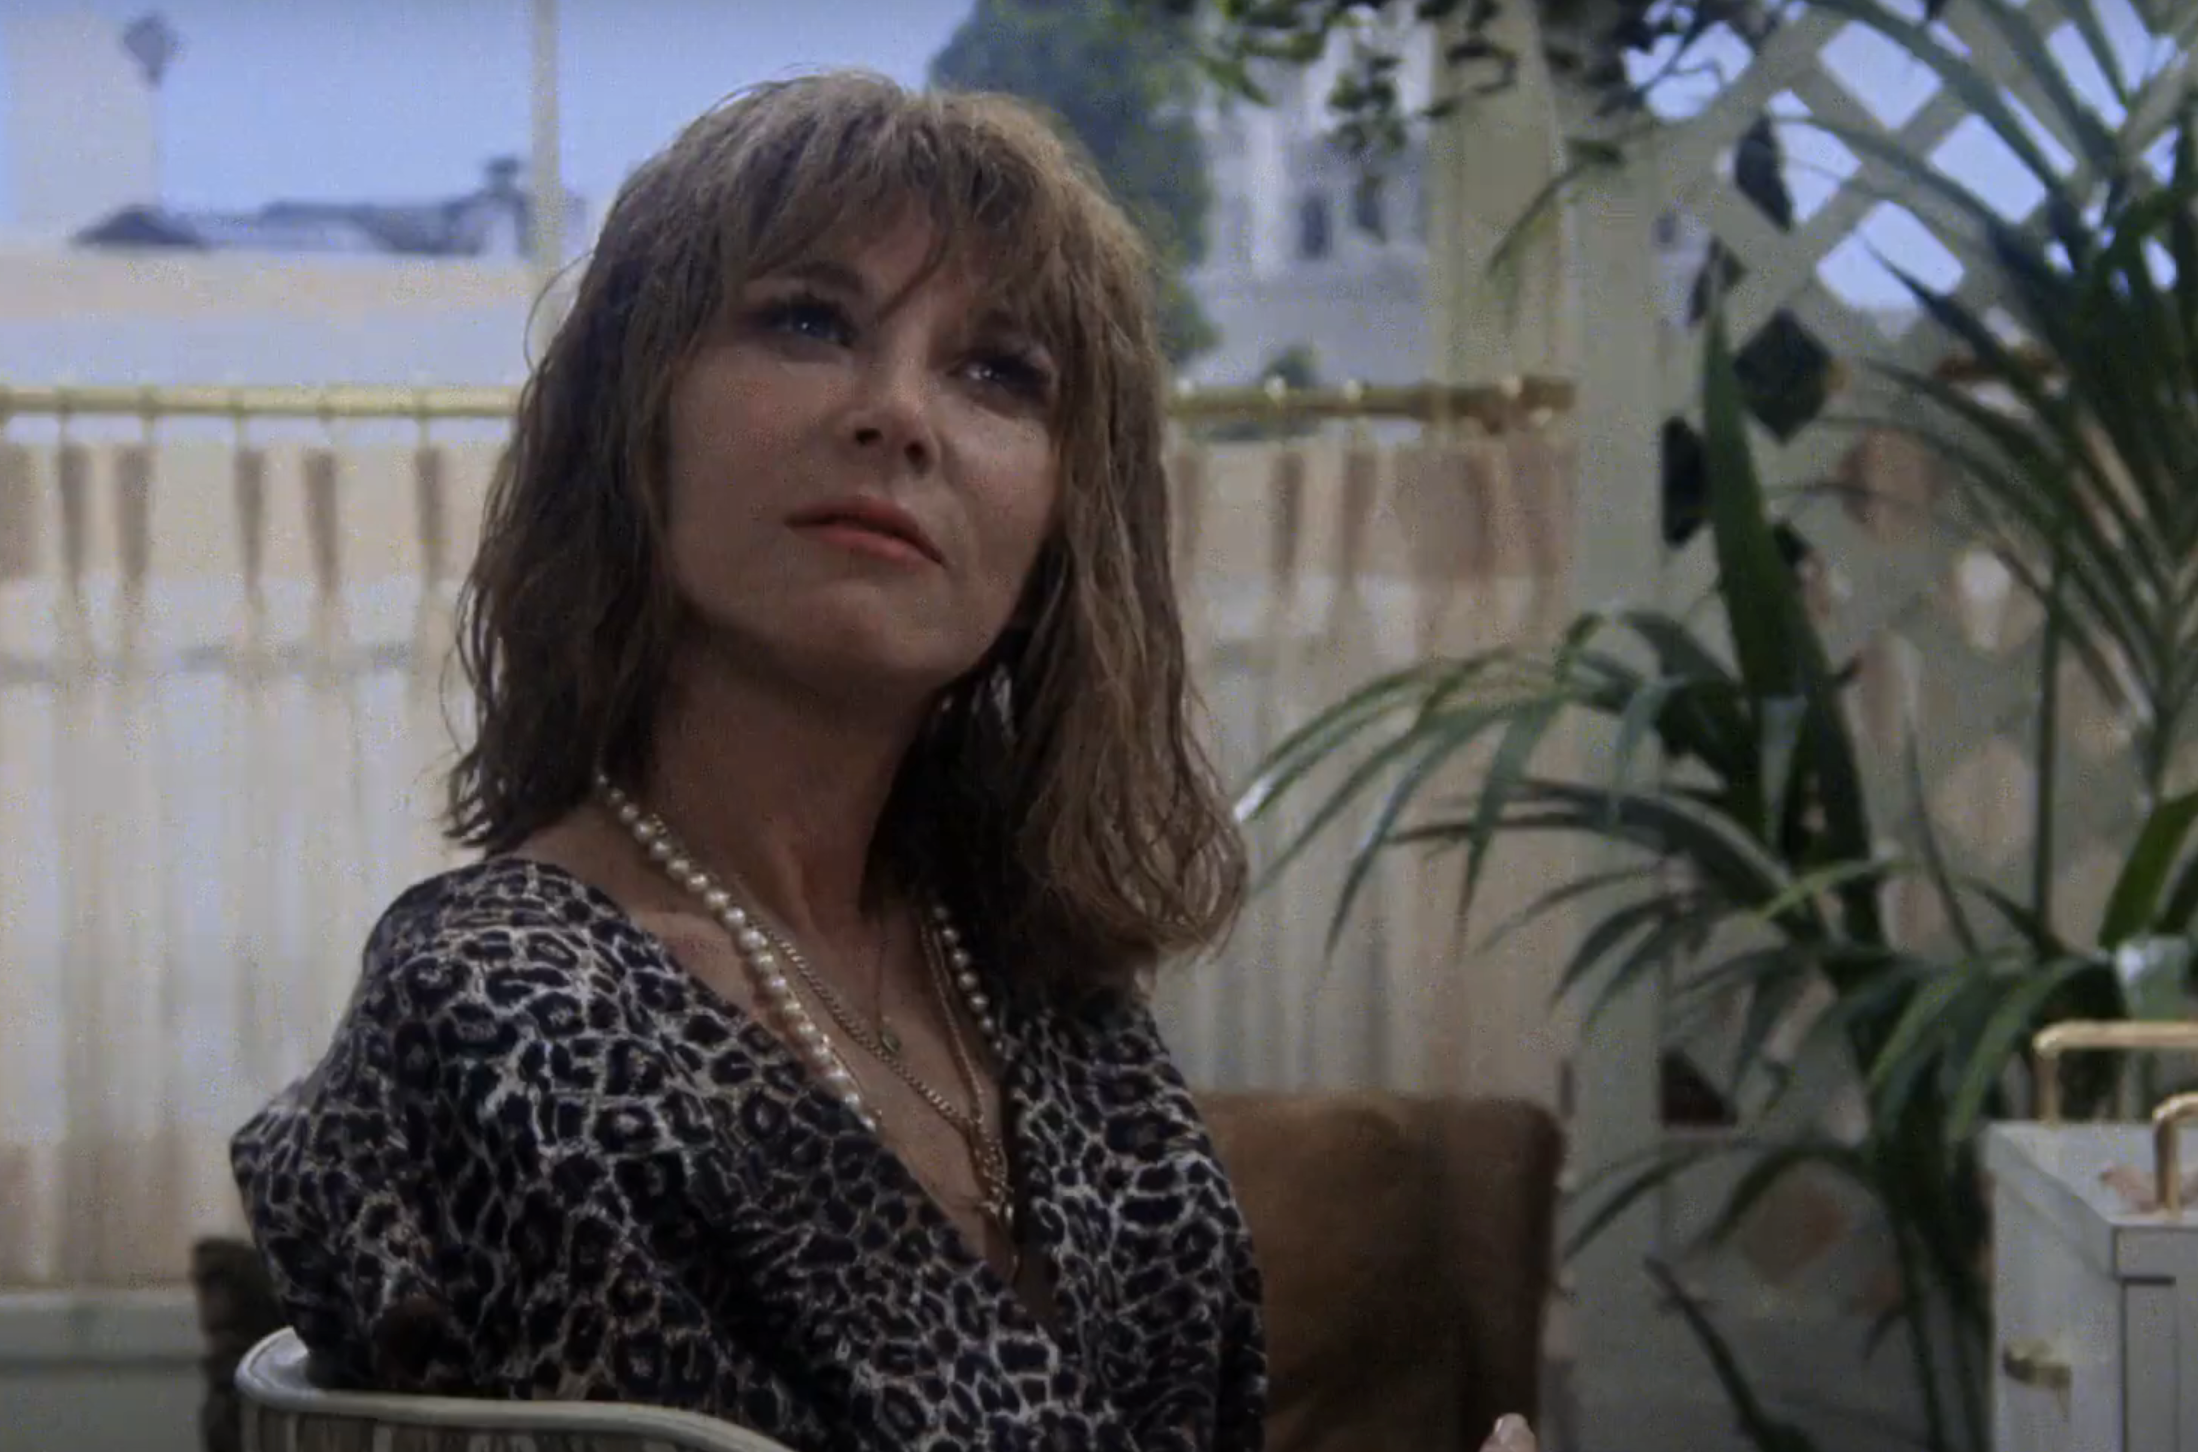 Lee Grant in a leopard print top and pearls, looking up, with potted plants in the background